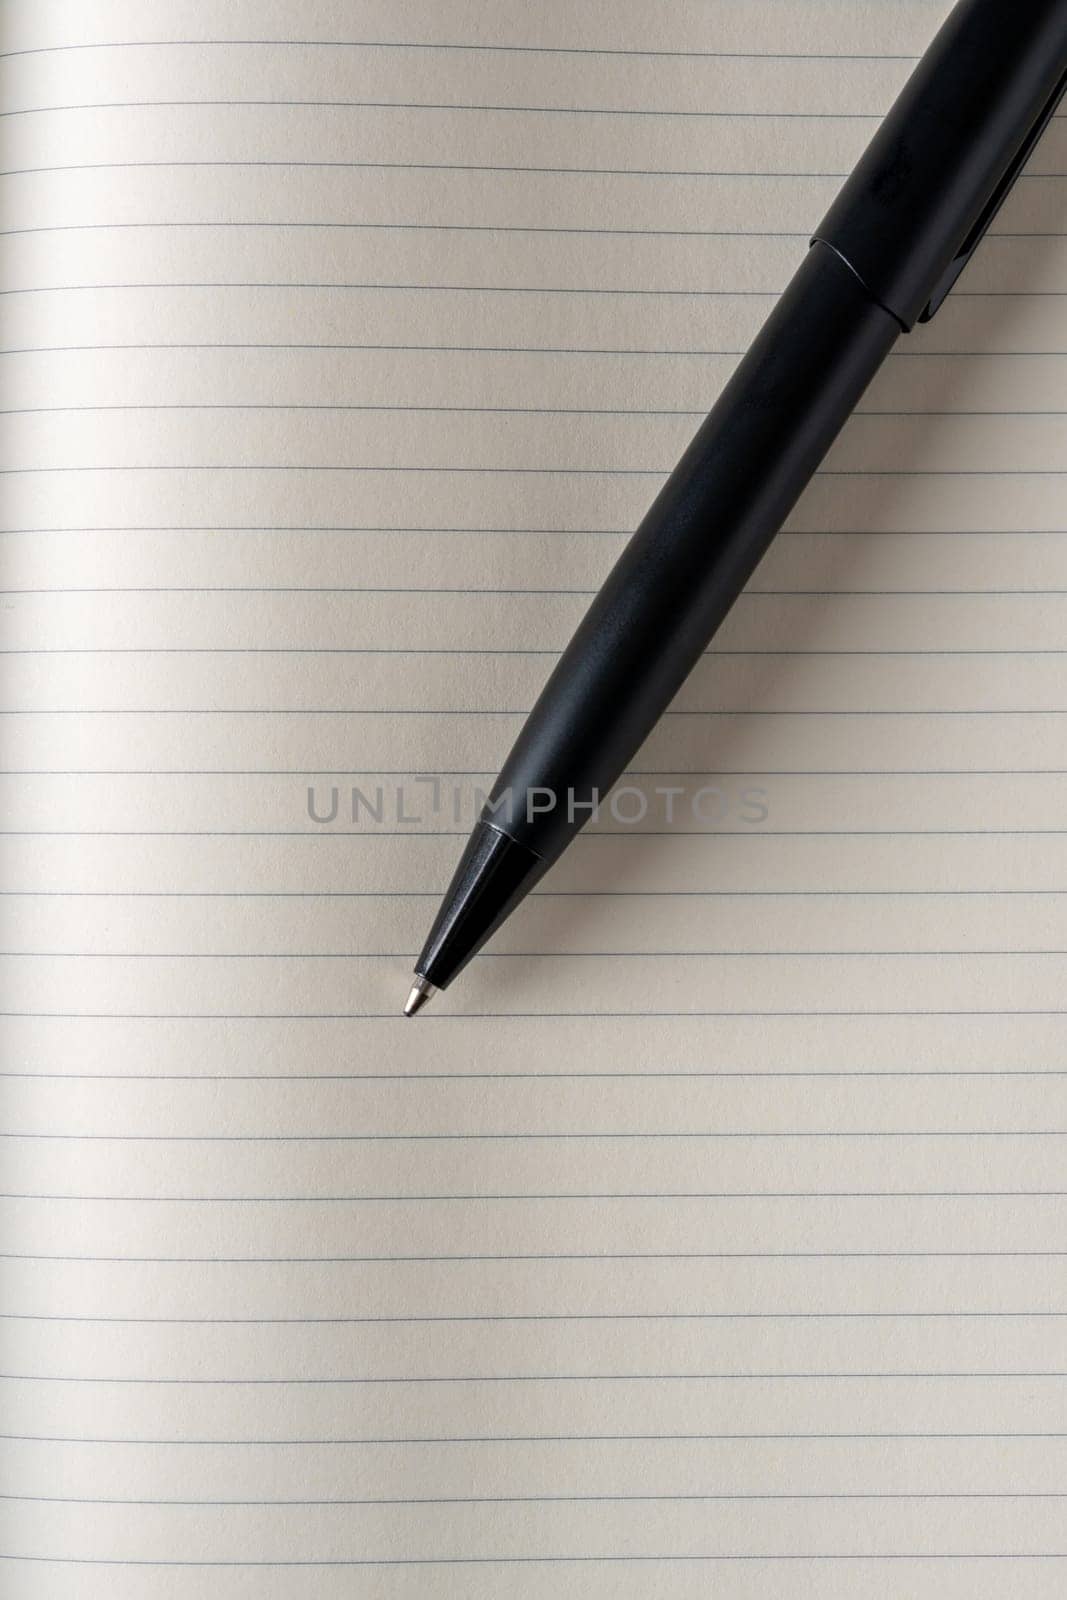 Top view of black ballpoint pen on lined note paper